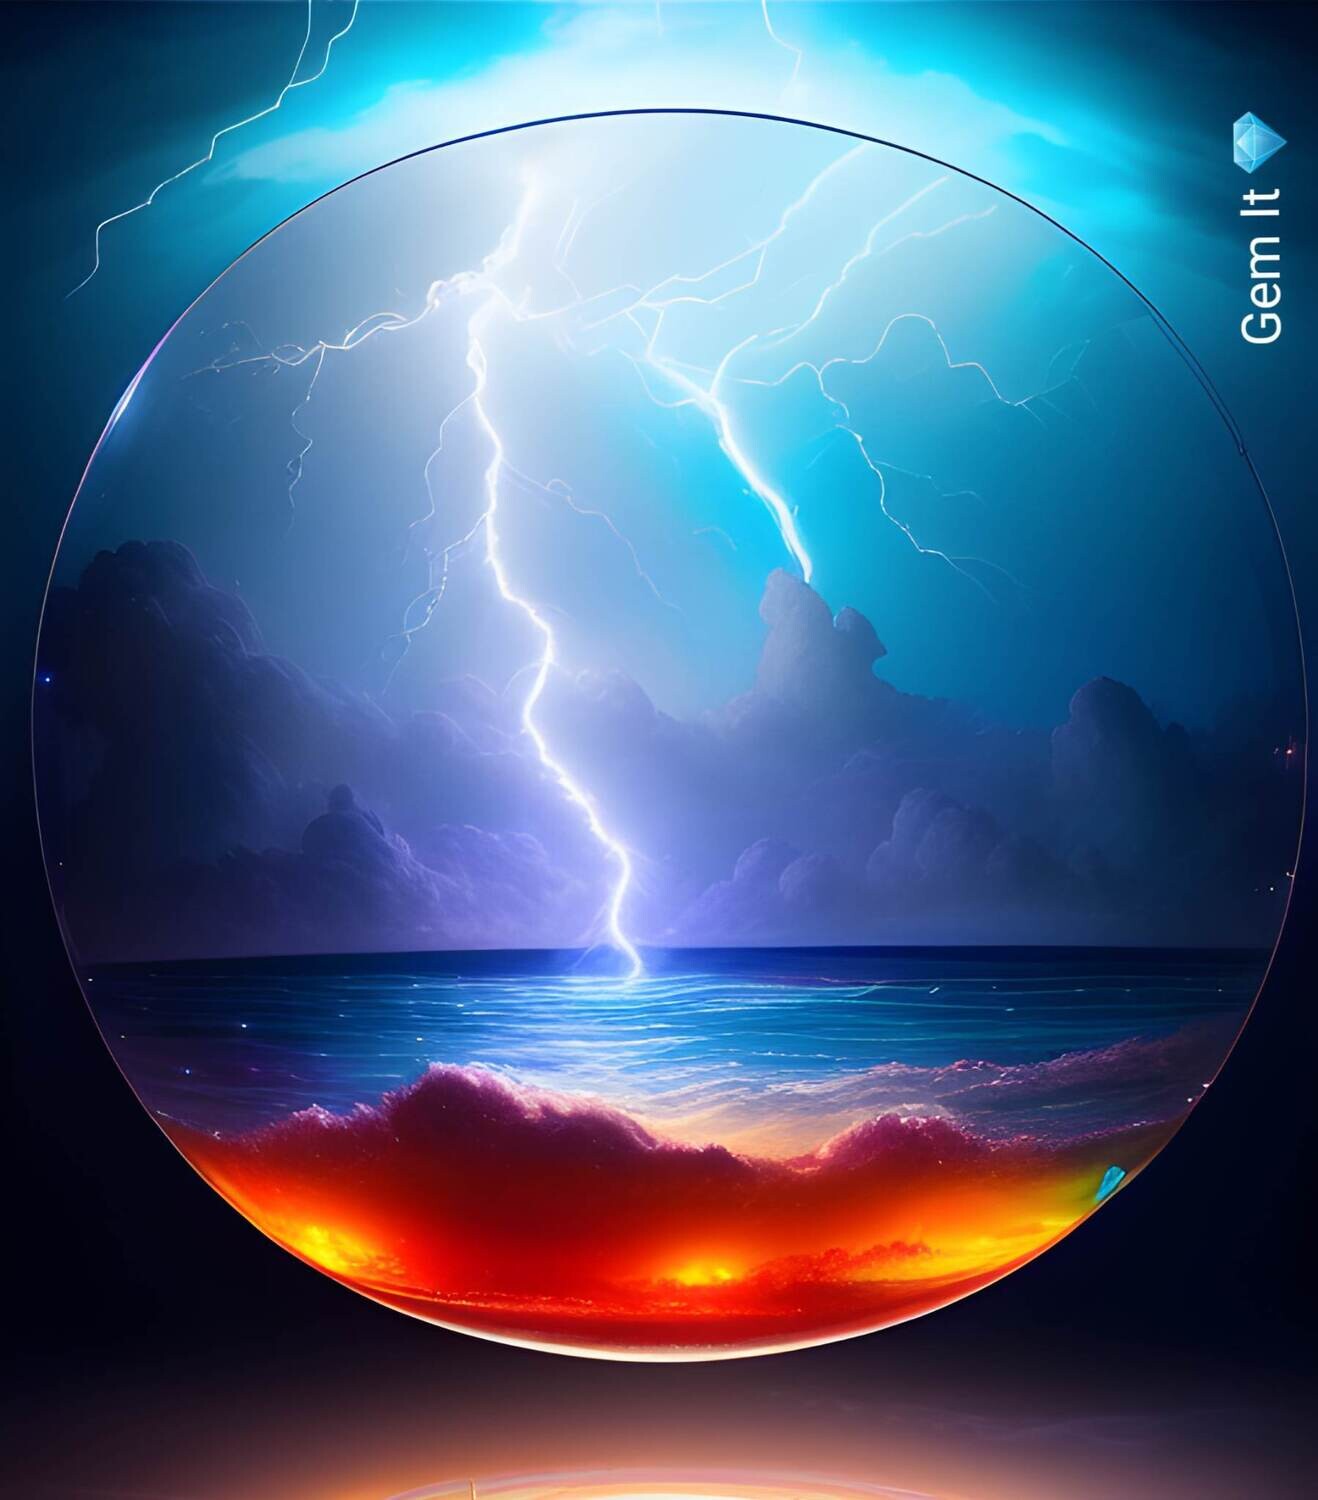 Storm in a glass sphere - Specially ordered for you. Delivery is approximately 4 - 6 weeks.